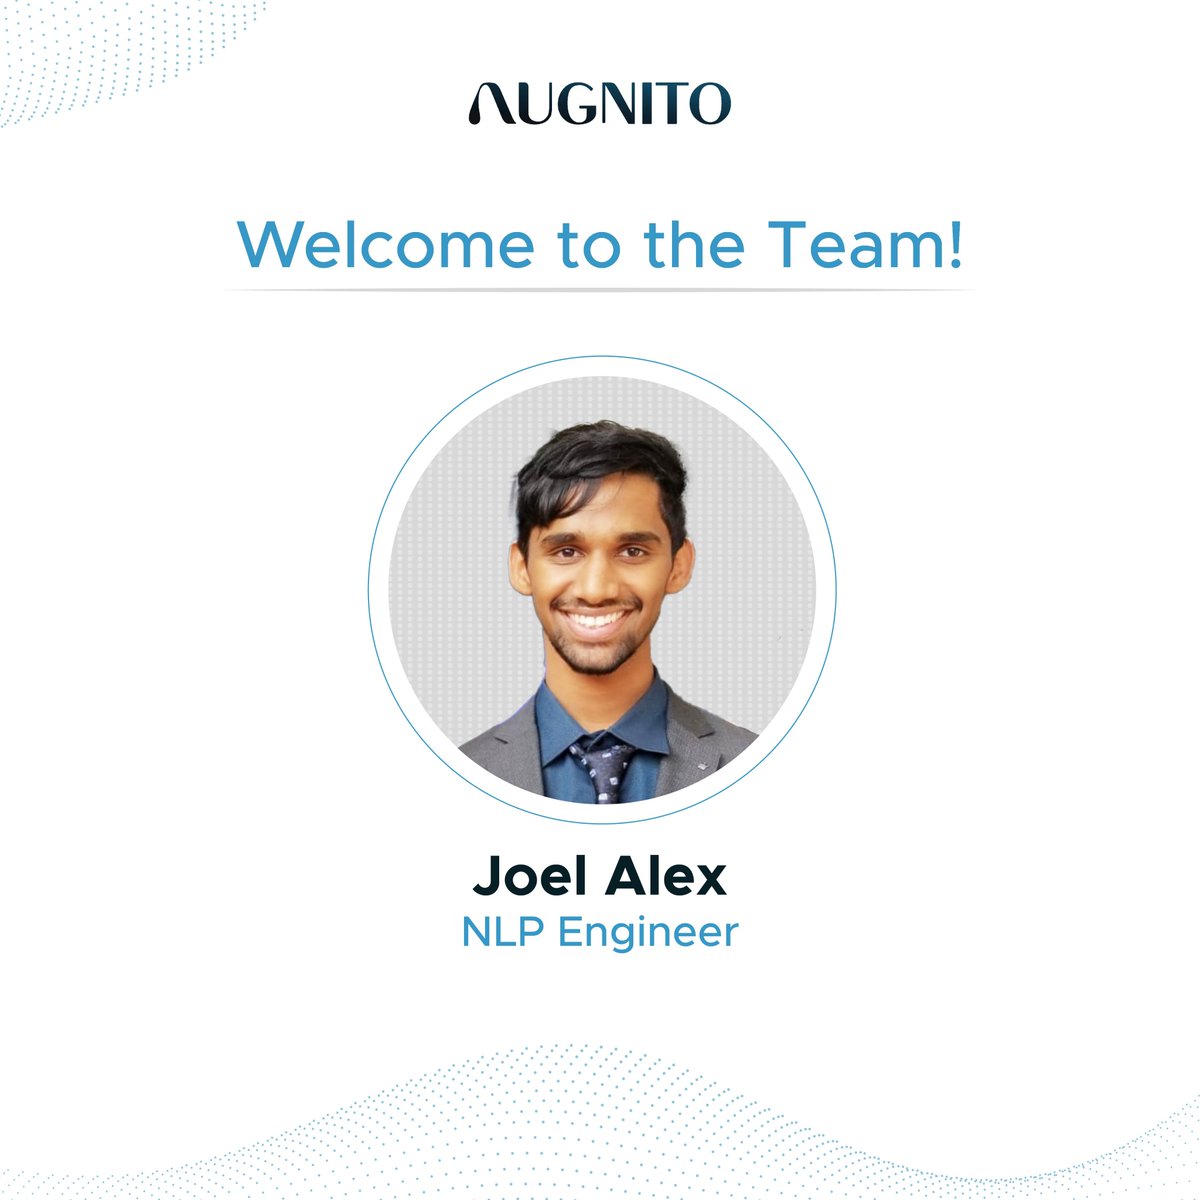 We’re happy to welcome Joel Alex from @iiit_hyderabad to the @Augnito team as an NLP Engineer!

Joel's arrival marks a significant success for our campus hiring initiatives.

#WelcometotheTeam #TeamAugnito #CampusHiring #Healthtech #Healthcare #Announcements #Hiring